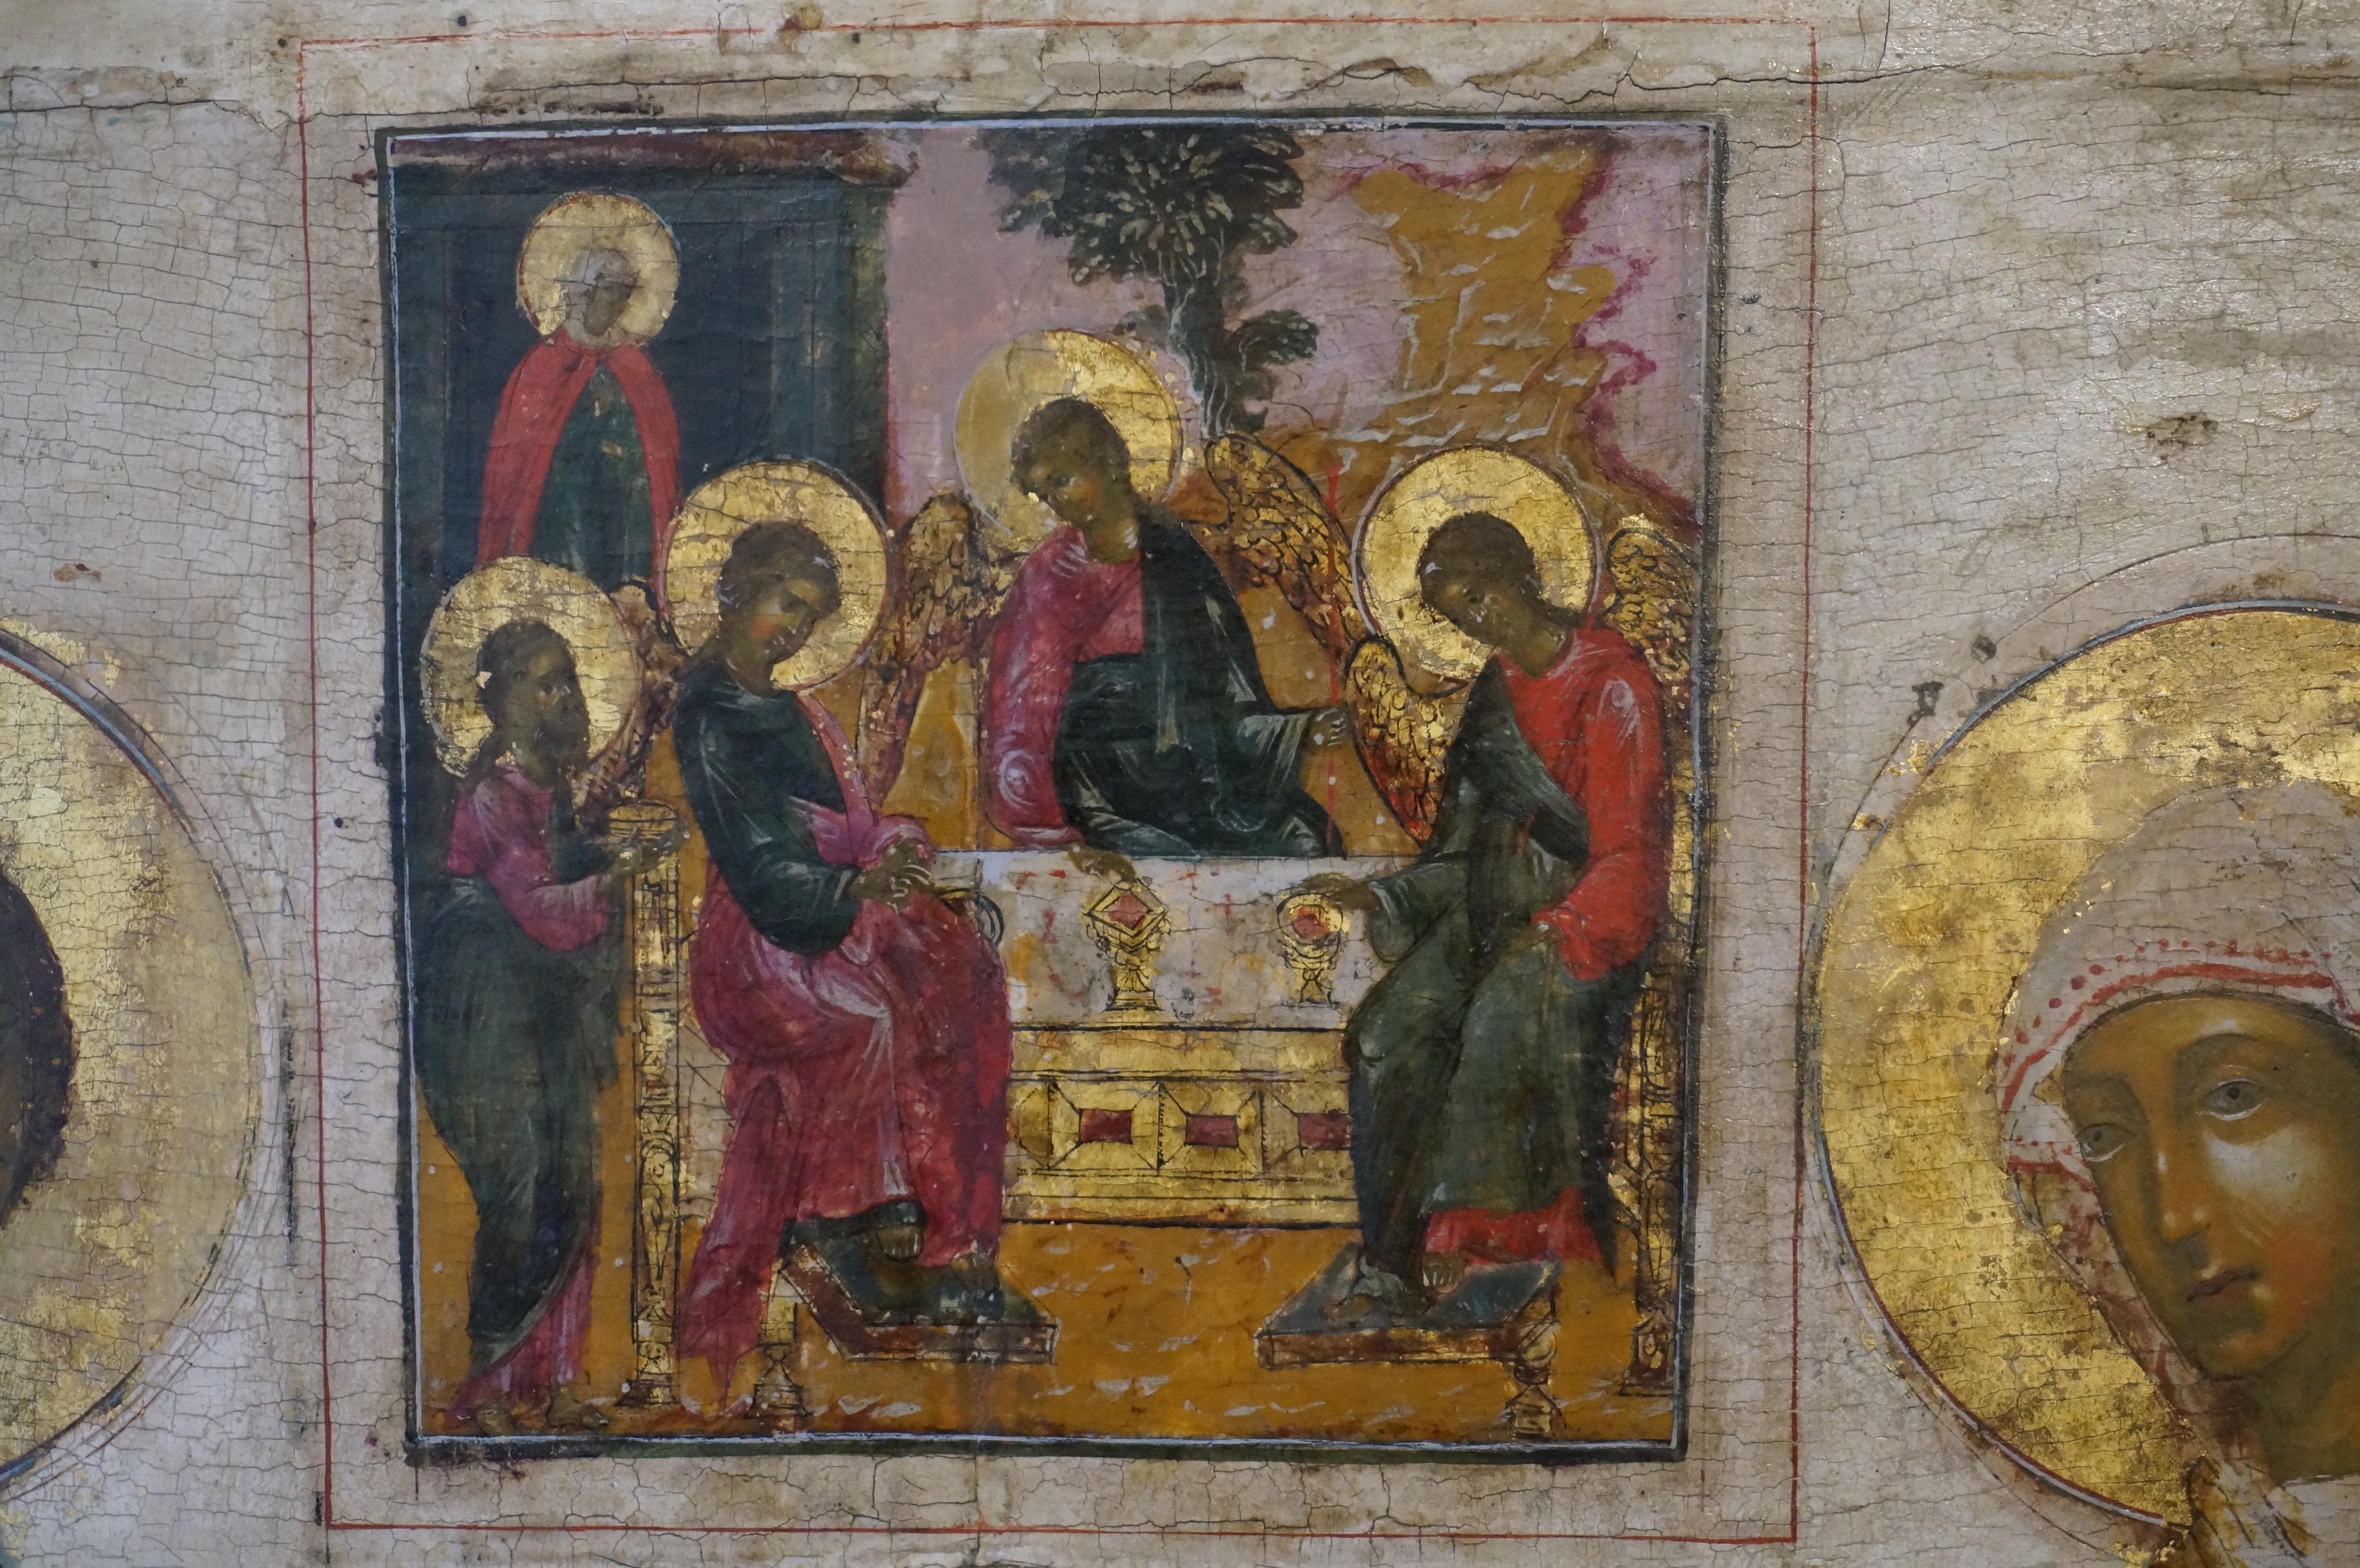 Rare icon with three chosen Saints most likely the patron saints of a family consisting of a father, a mother and a son. The inscriptions which could identify the saints are gone but most likely the depicted saints from left to right are: Saint